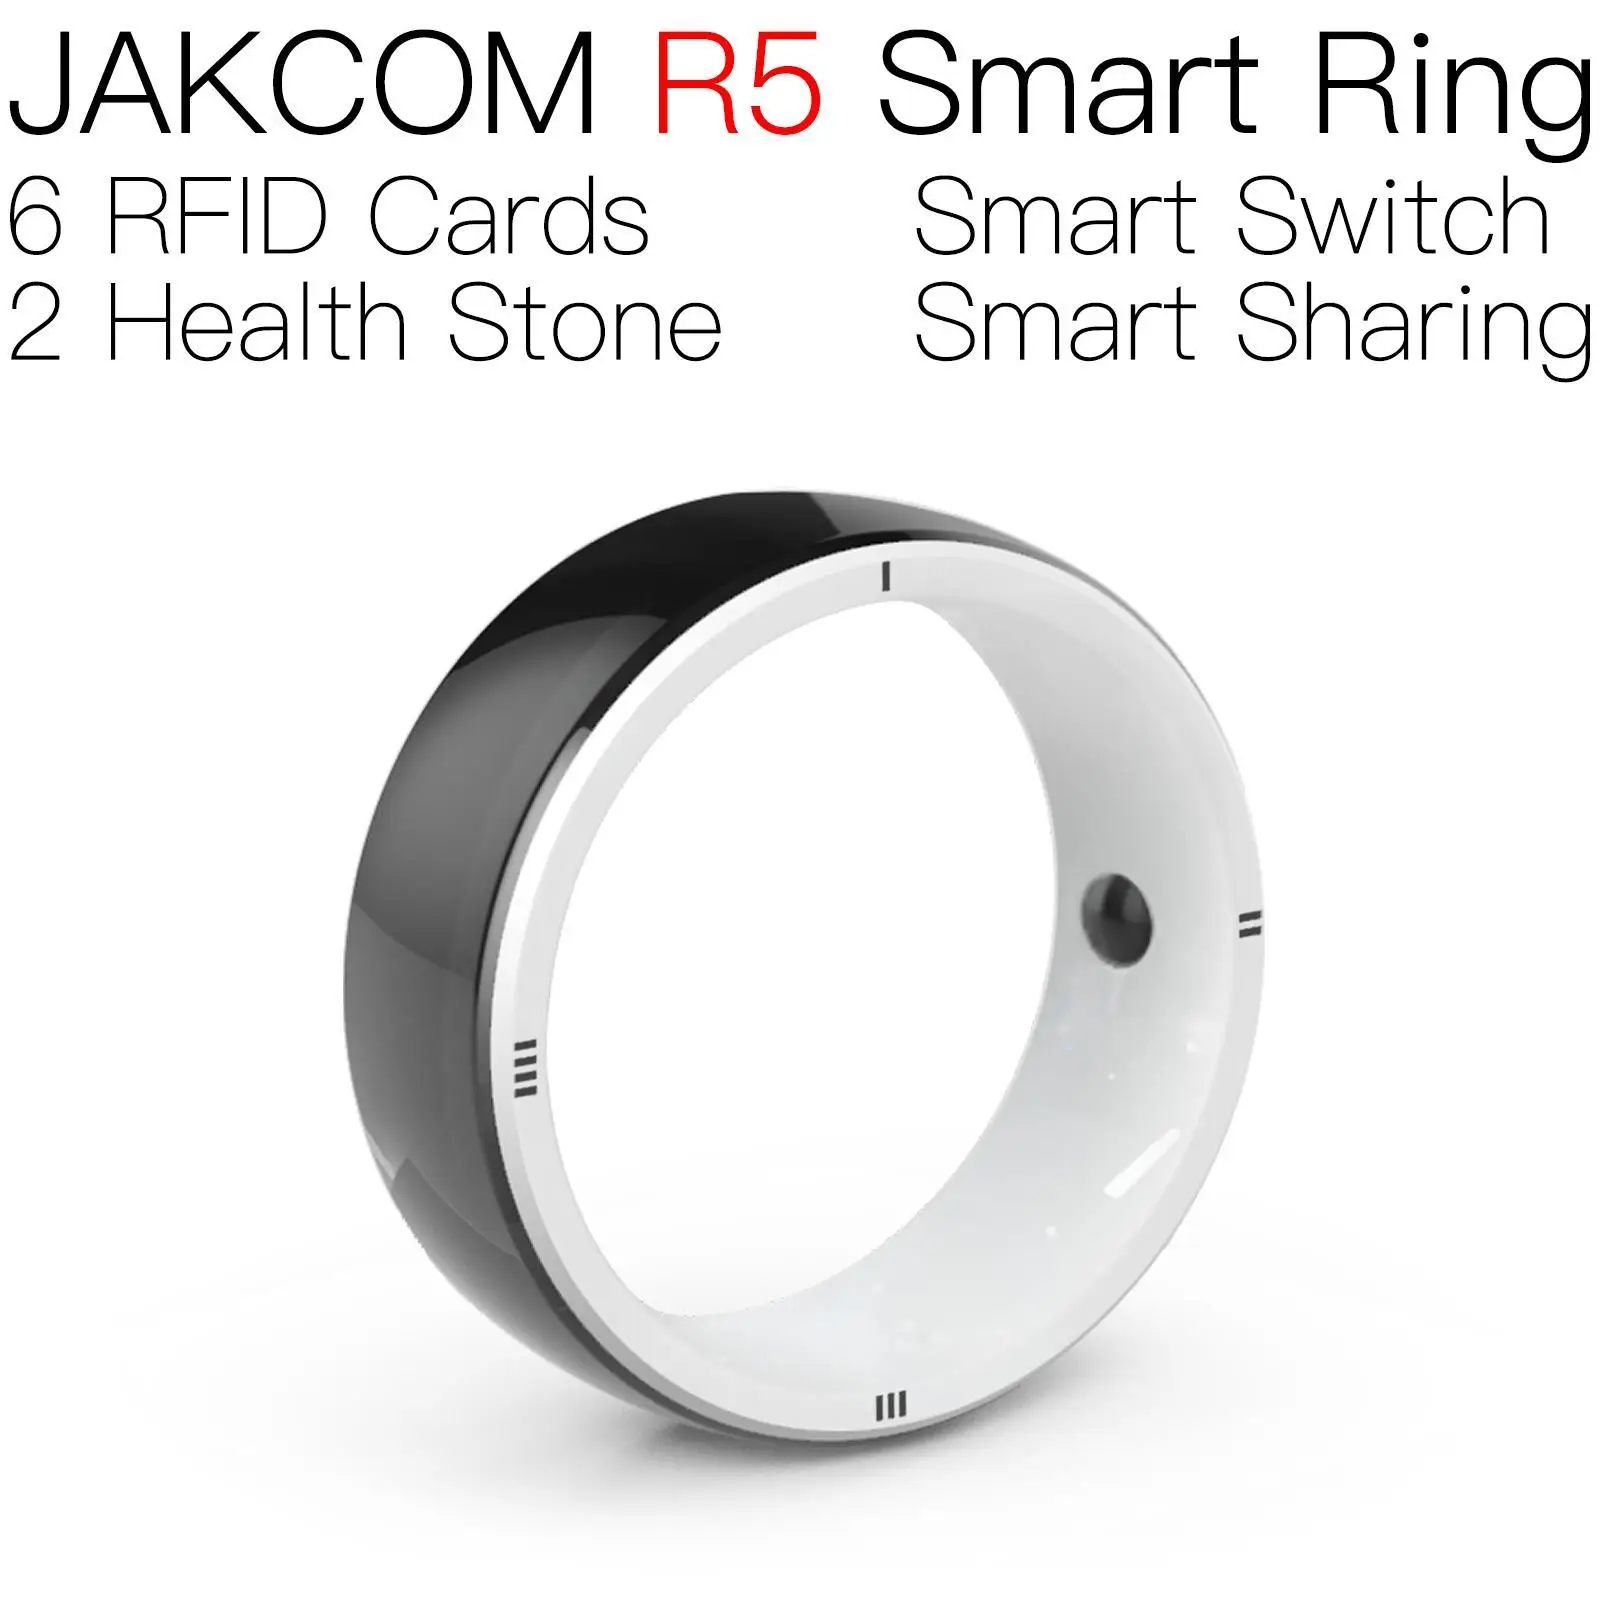 

JAKCOM R5 Smart Ring better than mhz coil paper trading 3 thin nfc chip crossing card diana dickies dress sticker